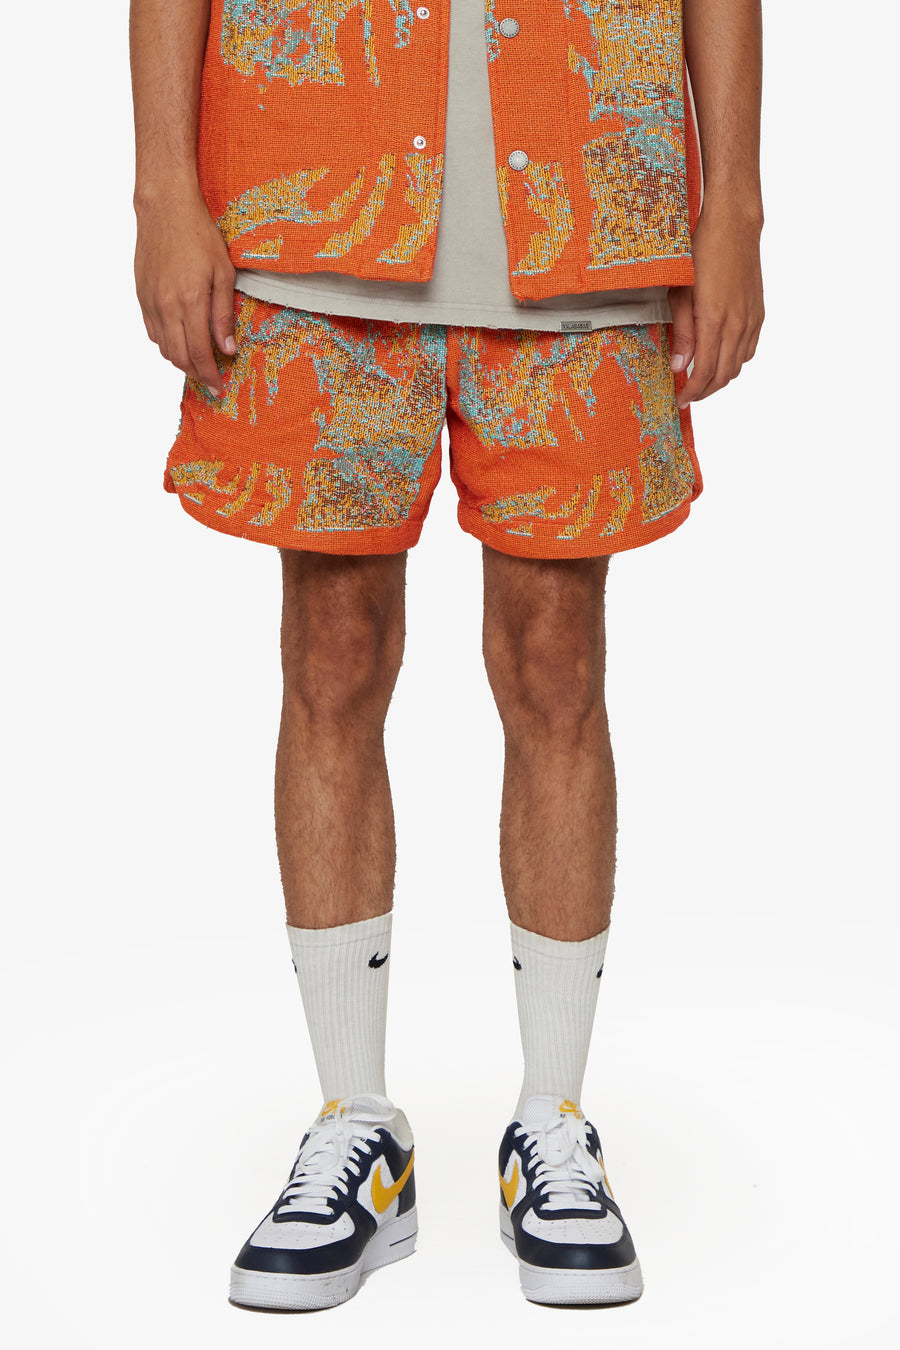 "GHOST HANDS" ORANGE TAPESTRY SHORTS